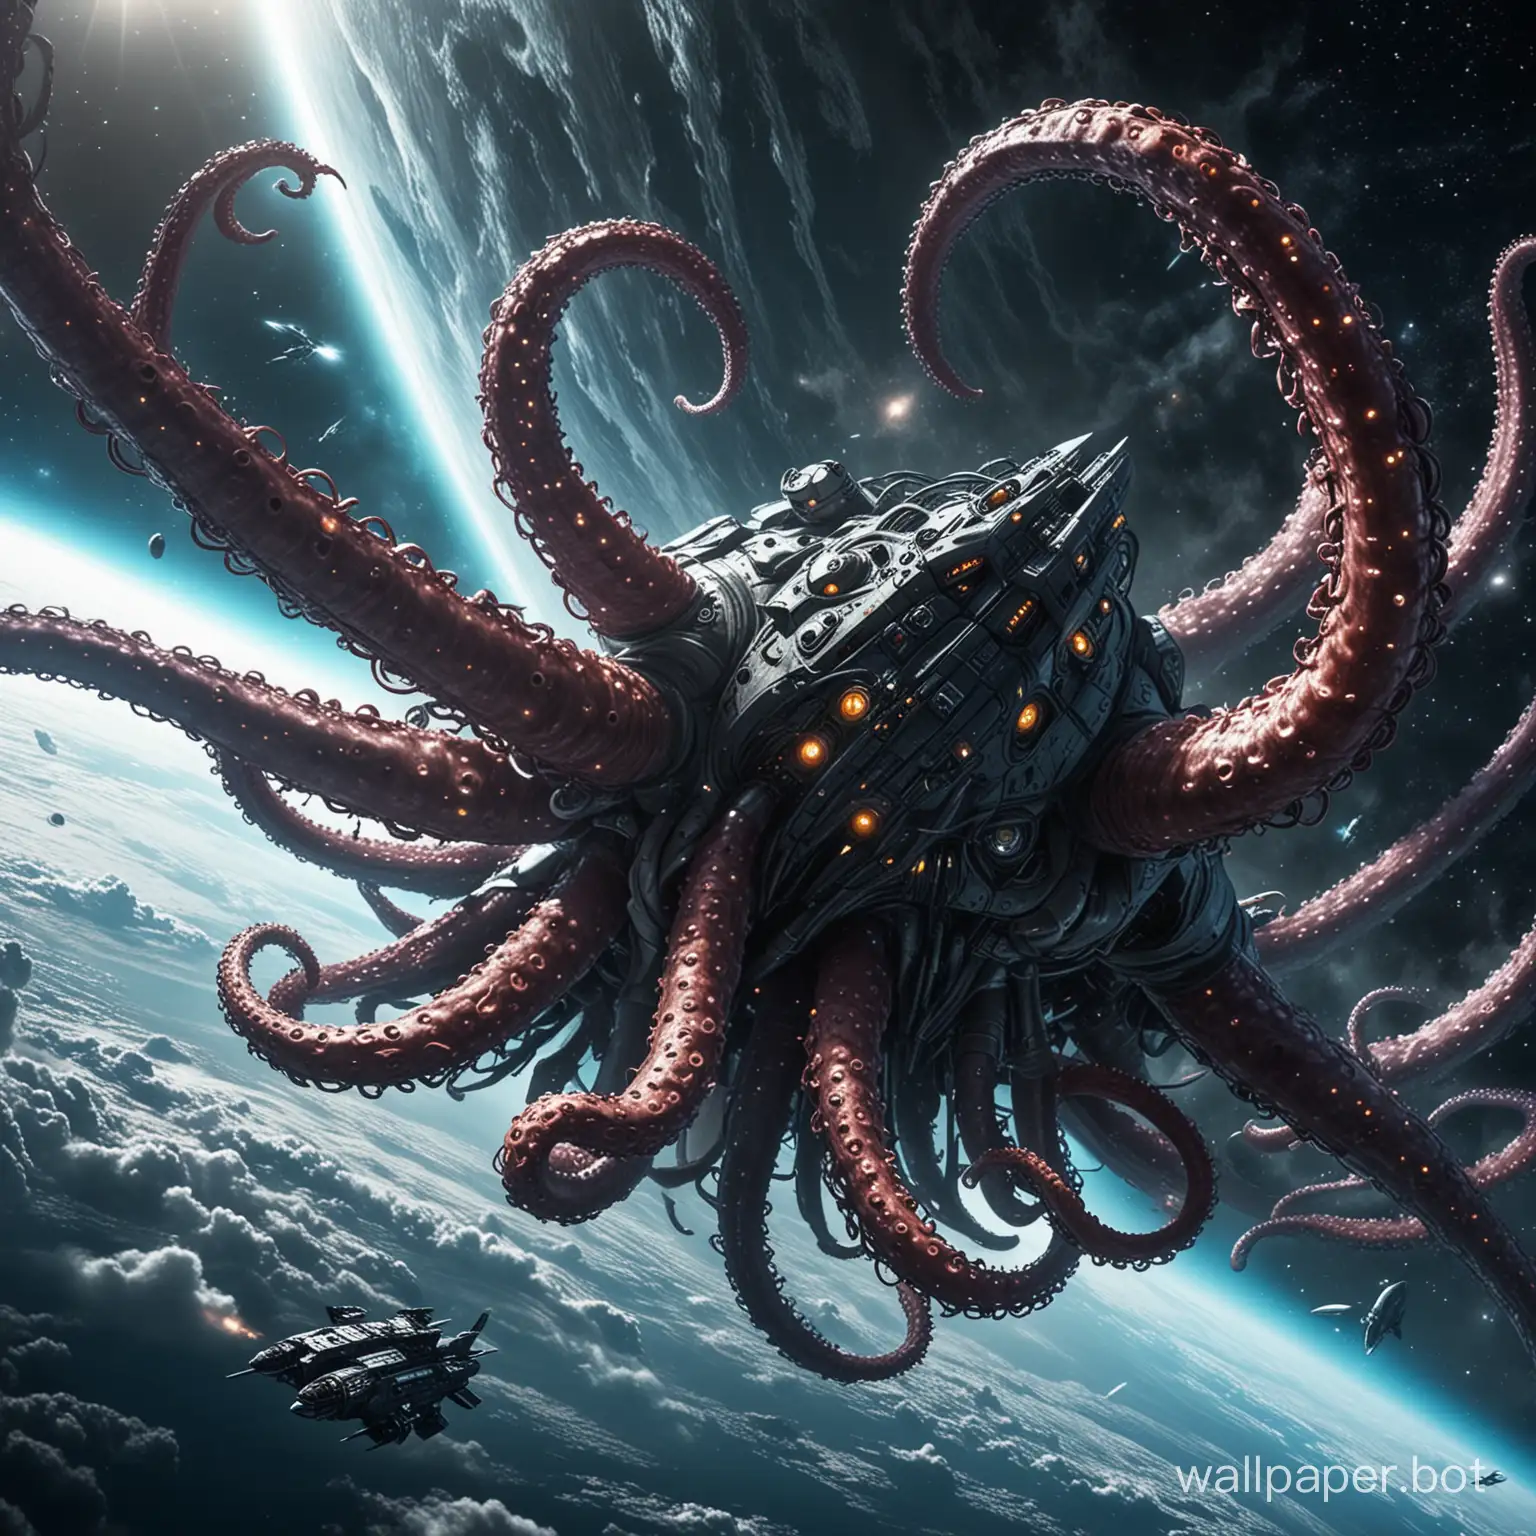 giant sci-fi alient tentacle monster attacking a spaceship in space